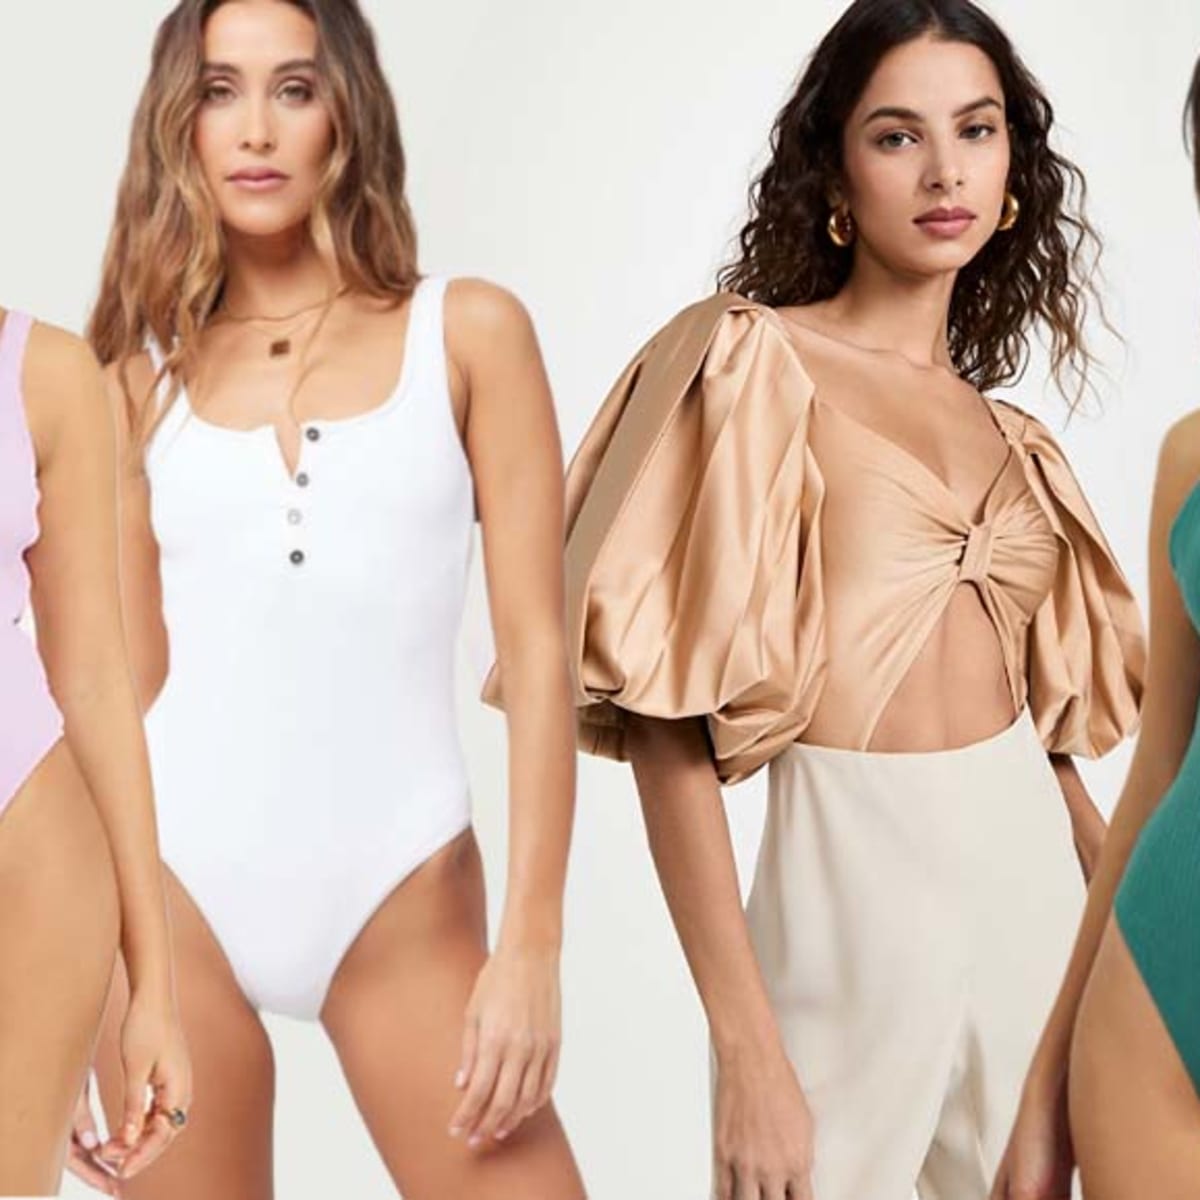 Double Your Swimsuit as a Bodysuit